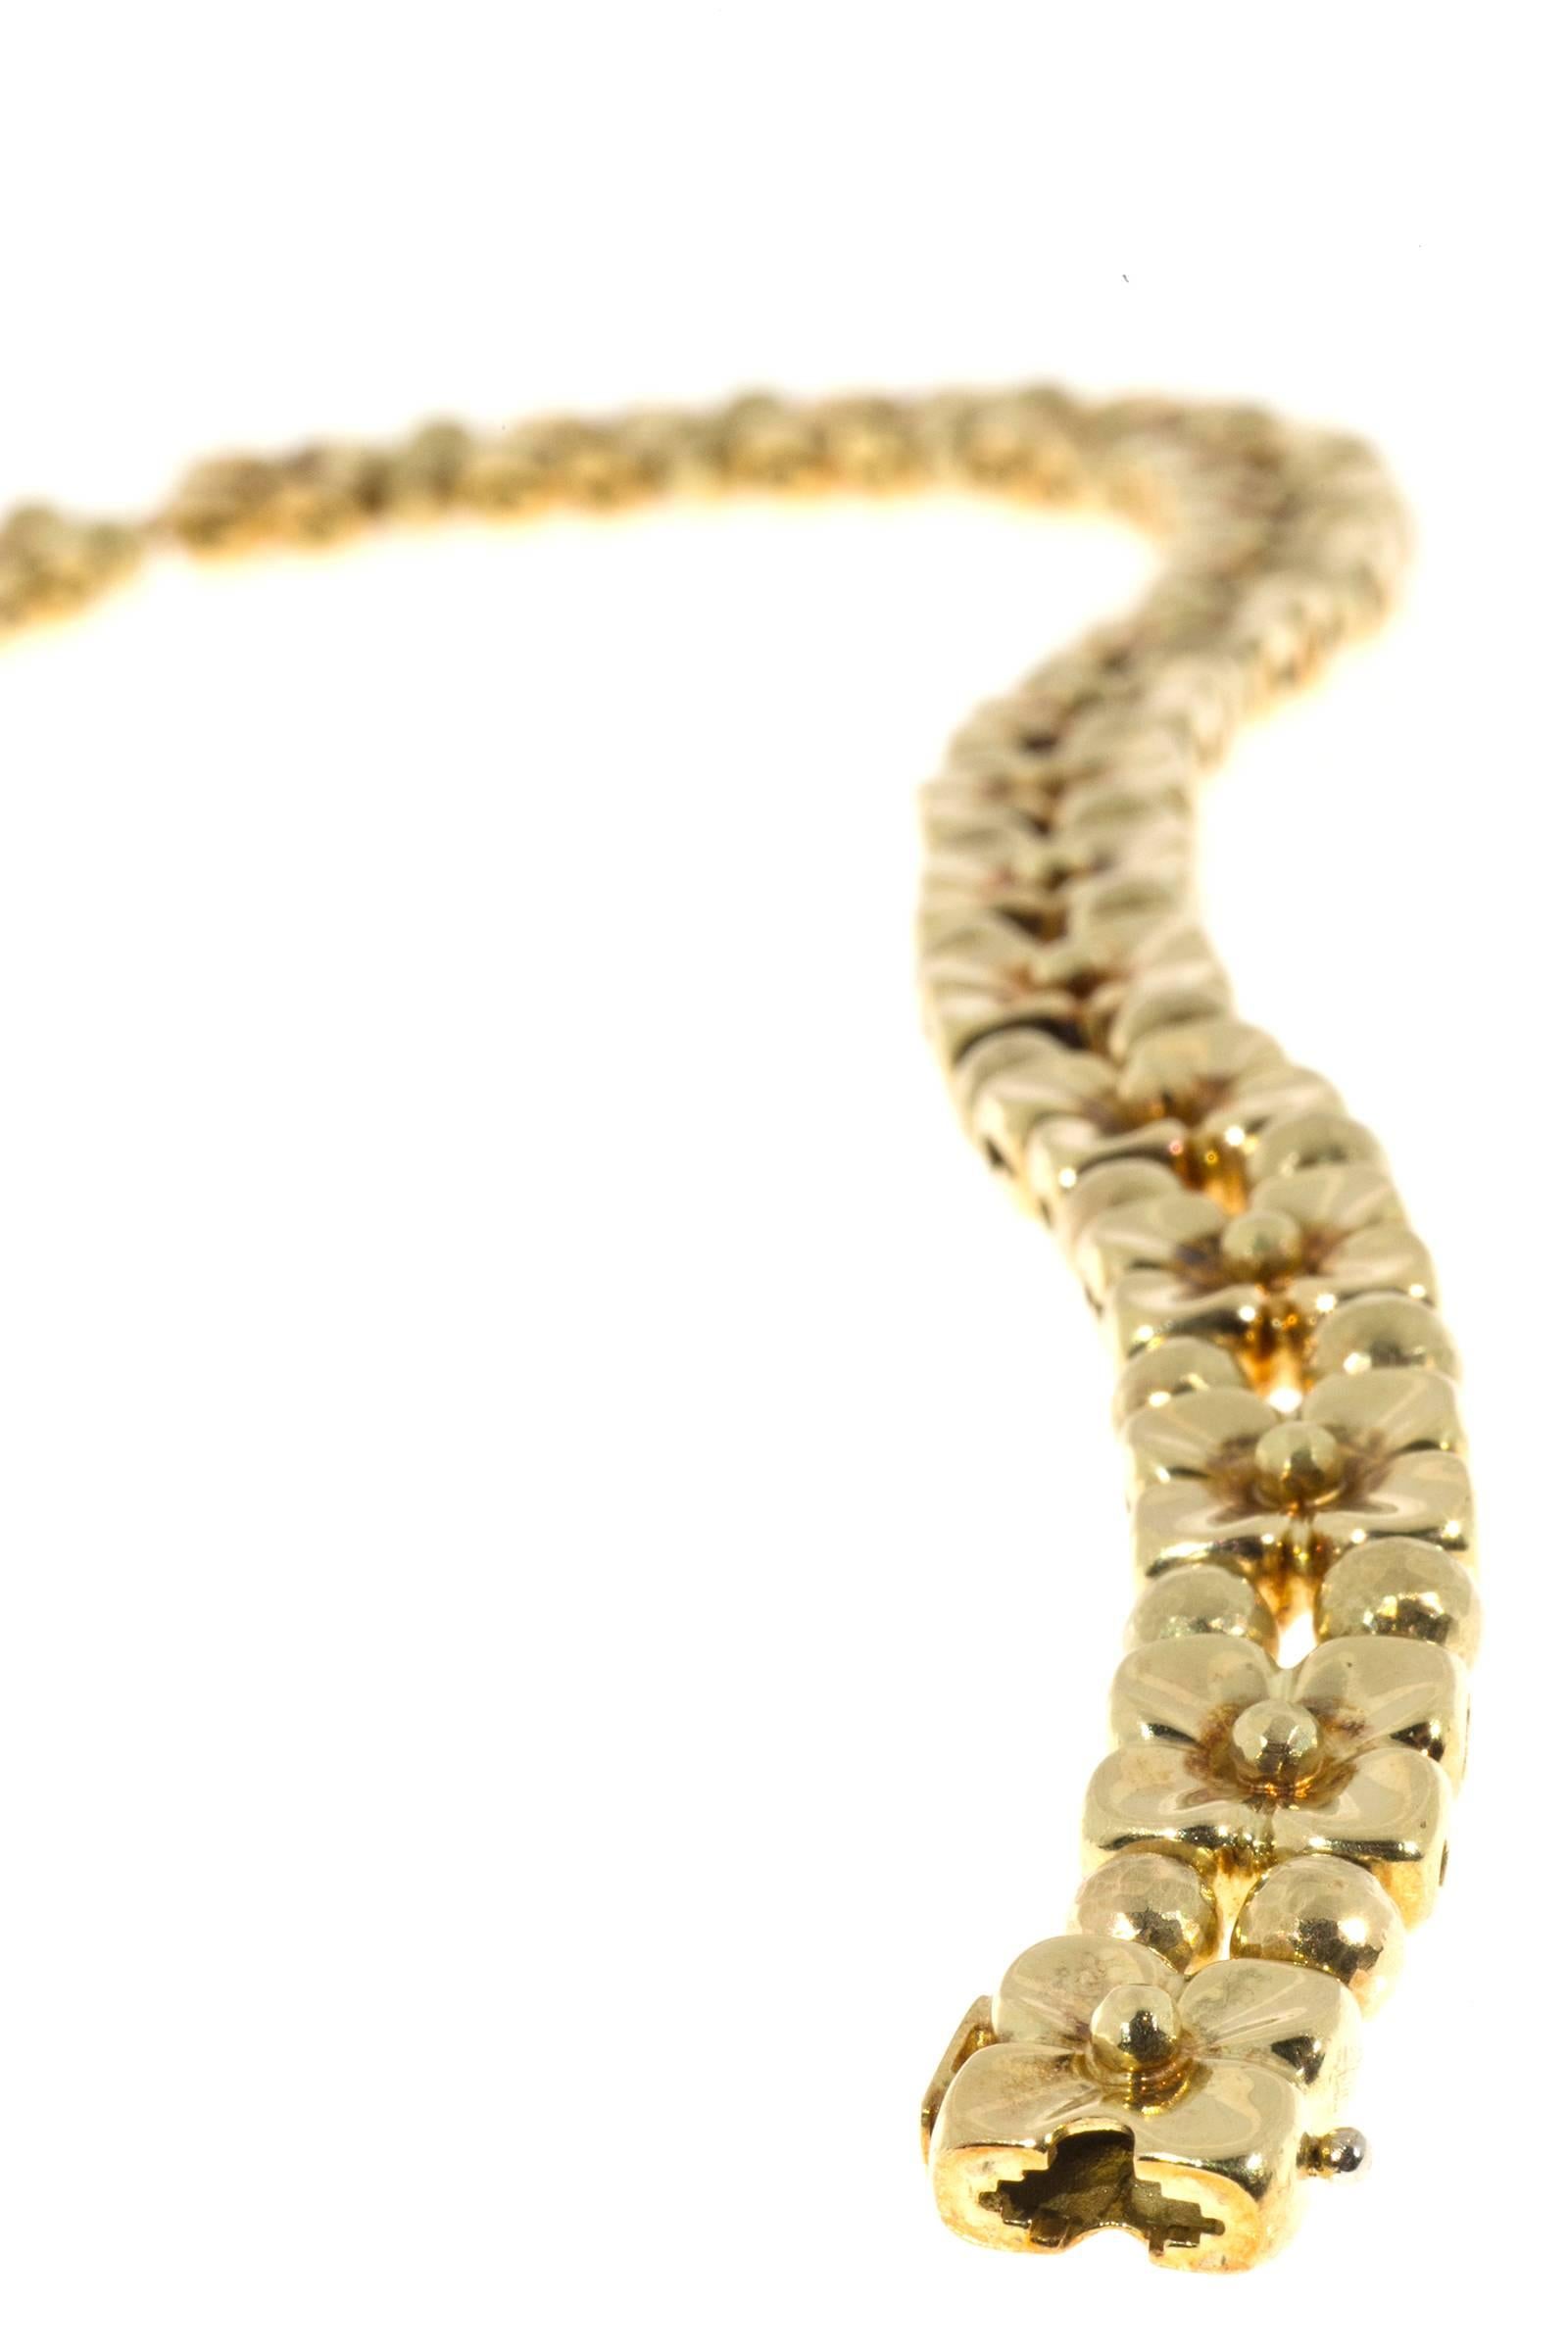 18k Italian textured greenish gold necklace with 25 round  F, VS diamonds.  Strung on 2 rows of 18k cable chain. Plain shiny flowers on one side and textured flowers on  the other. 

25 round diamonds .04cts each totally 1.00cts, F, VS
18k Yellow